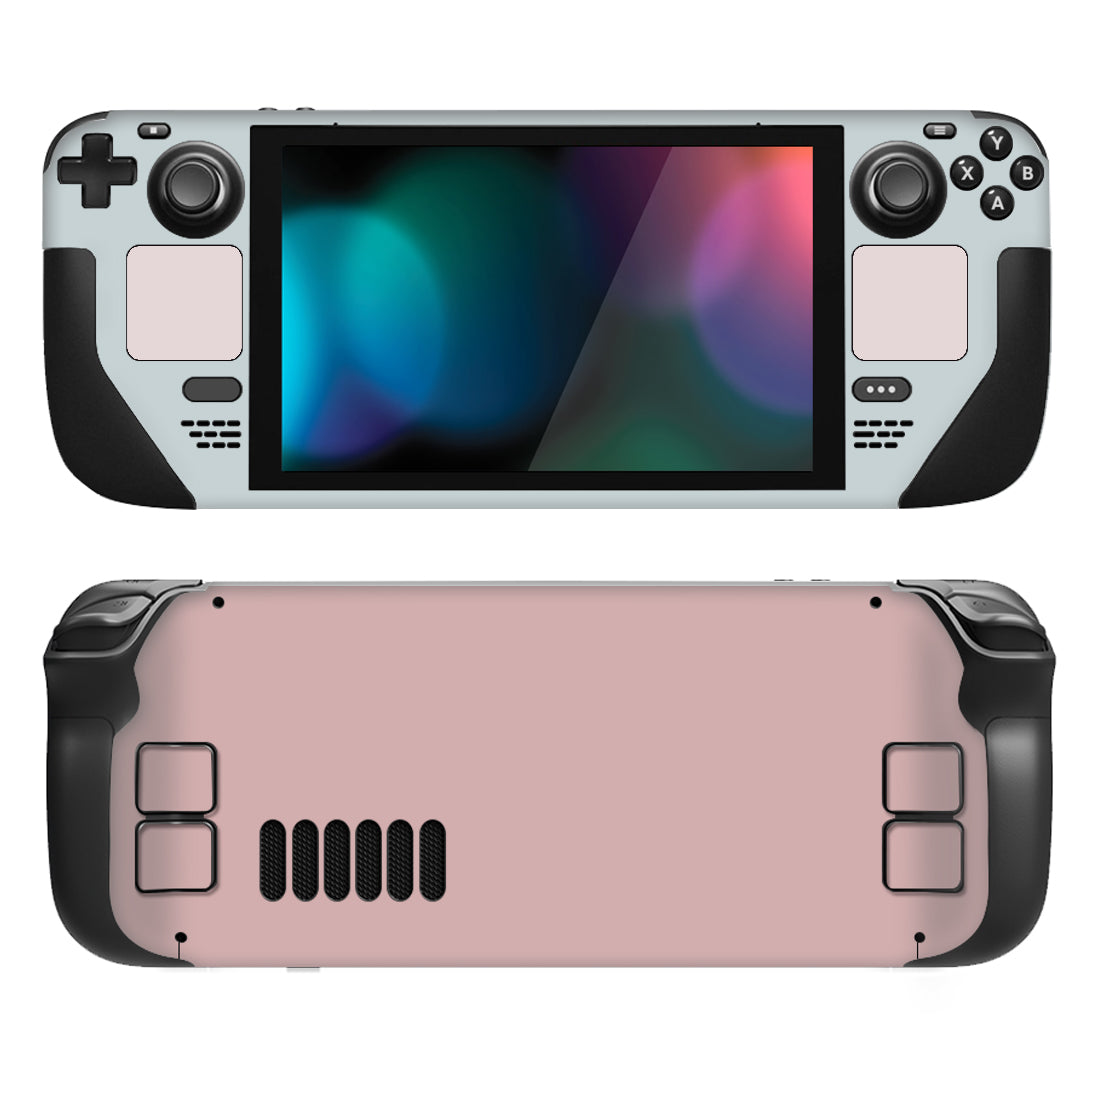 PlayVital Full Set Protective Skin Decal for Steam Deck, Custom Stickers Vinyl Cover for Steam Deck Handheld Gaming PC - Pale Series - Mist Grey & Pink #1 - SDTM086 PlayVital